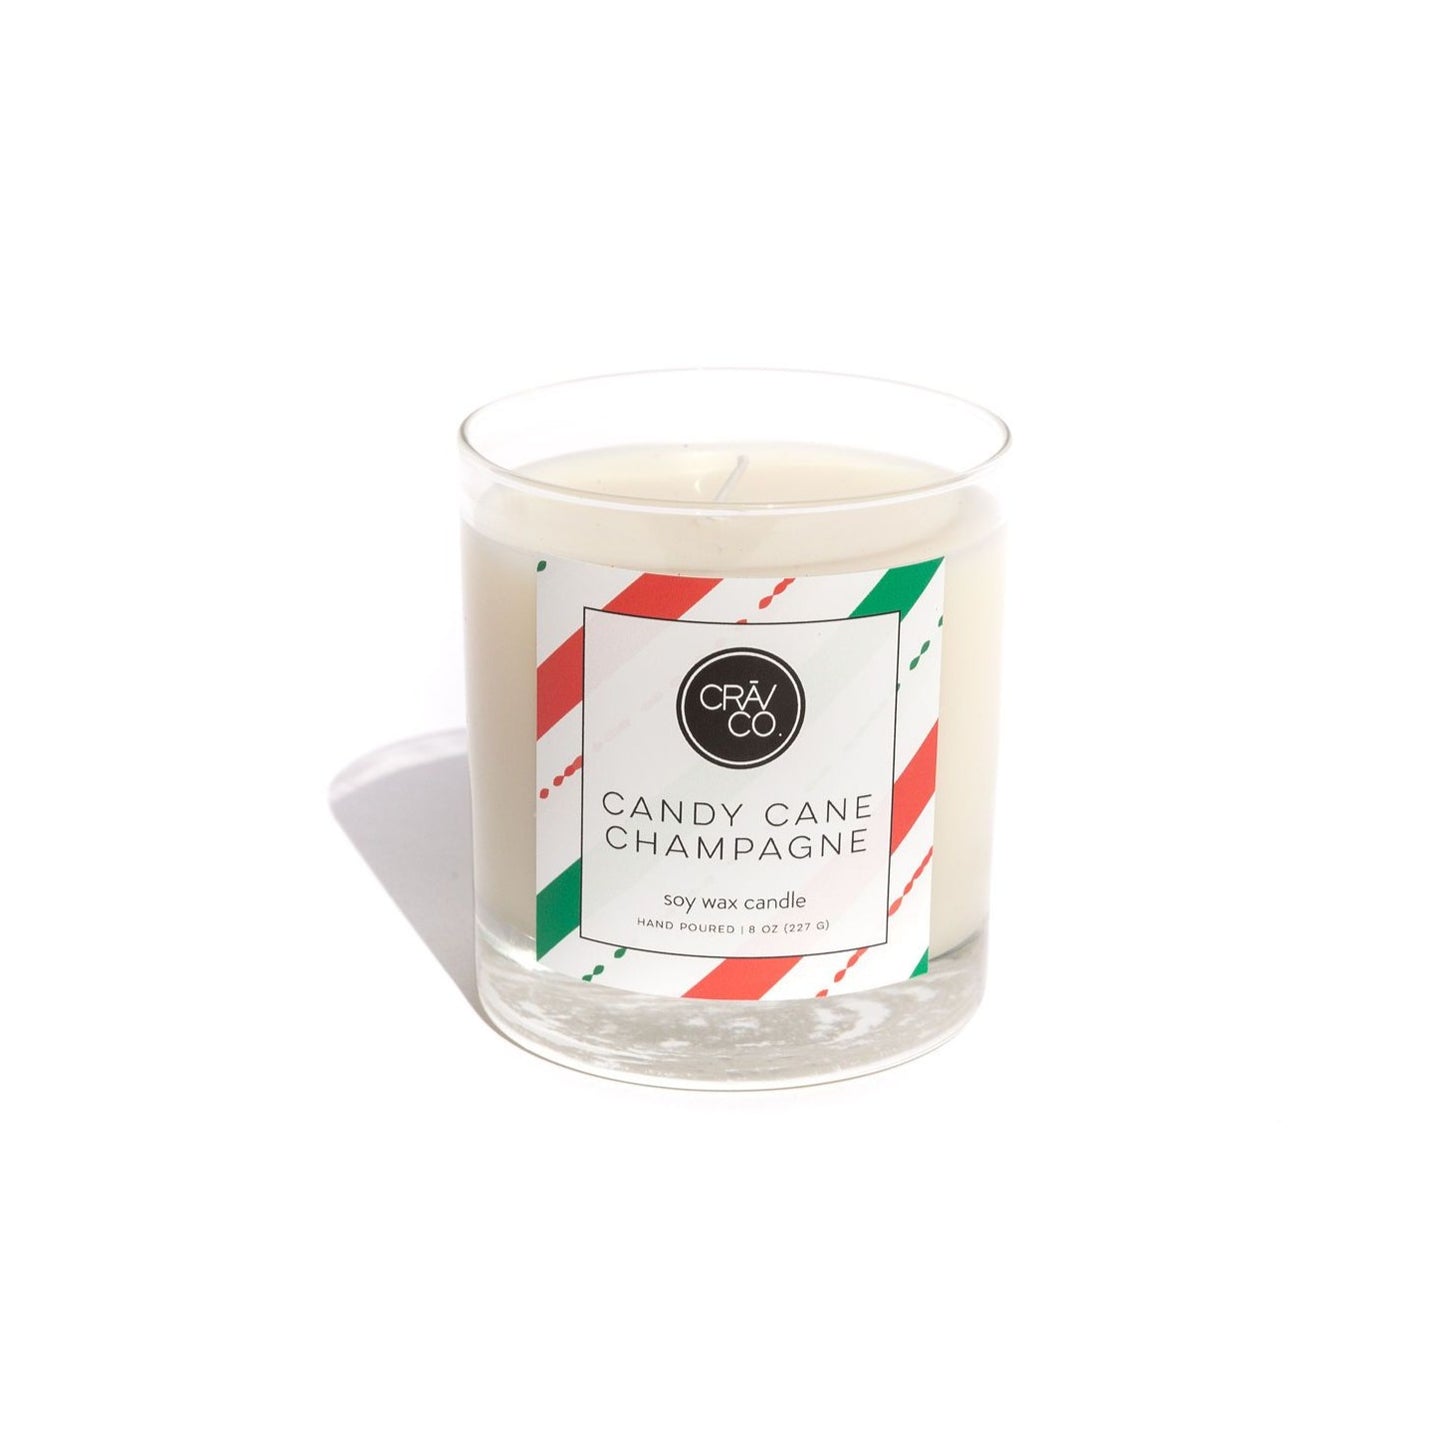 Candy Cane Champagne Candle - CRAV Company